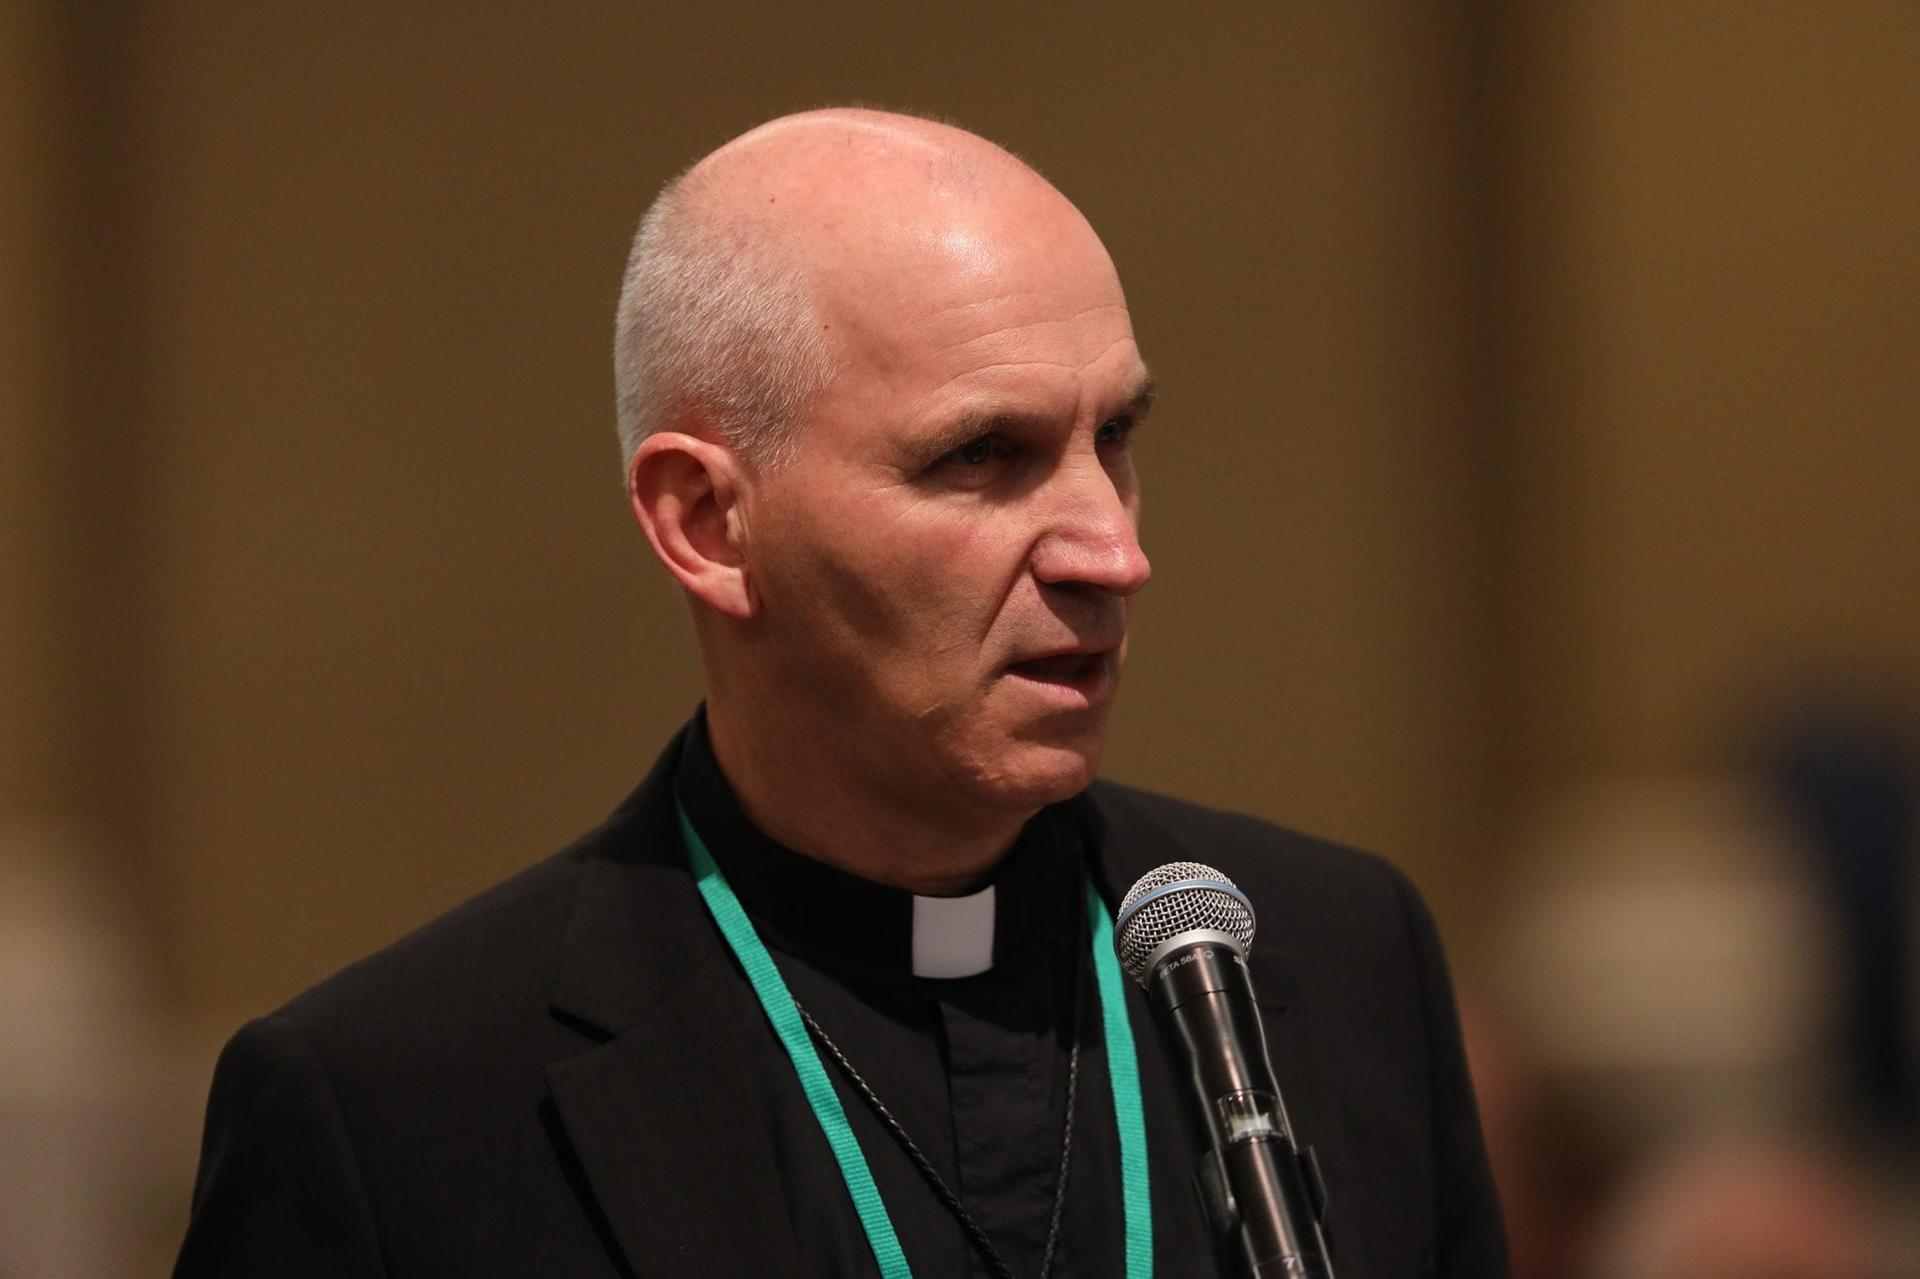 Case of Bishop Hart shows role clericalism plays in abuse cover-up